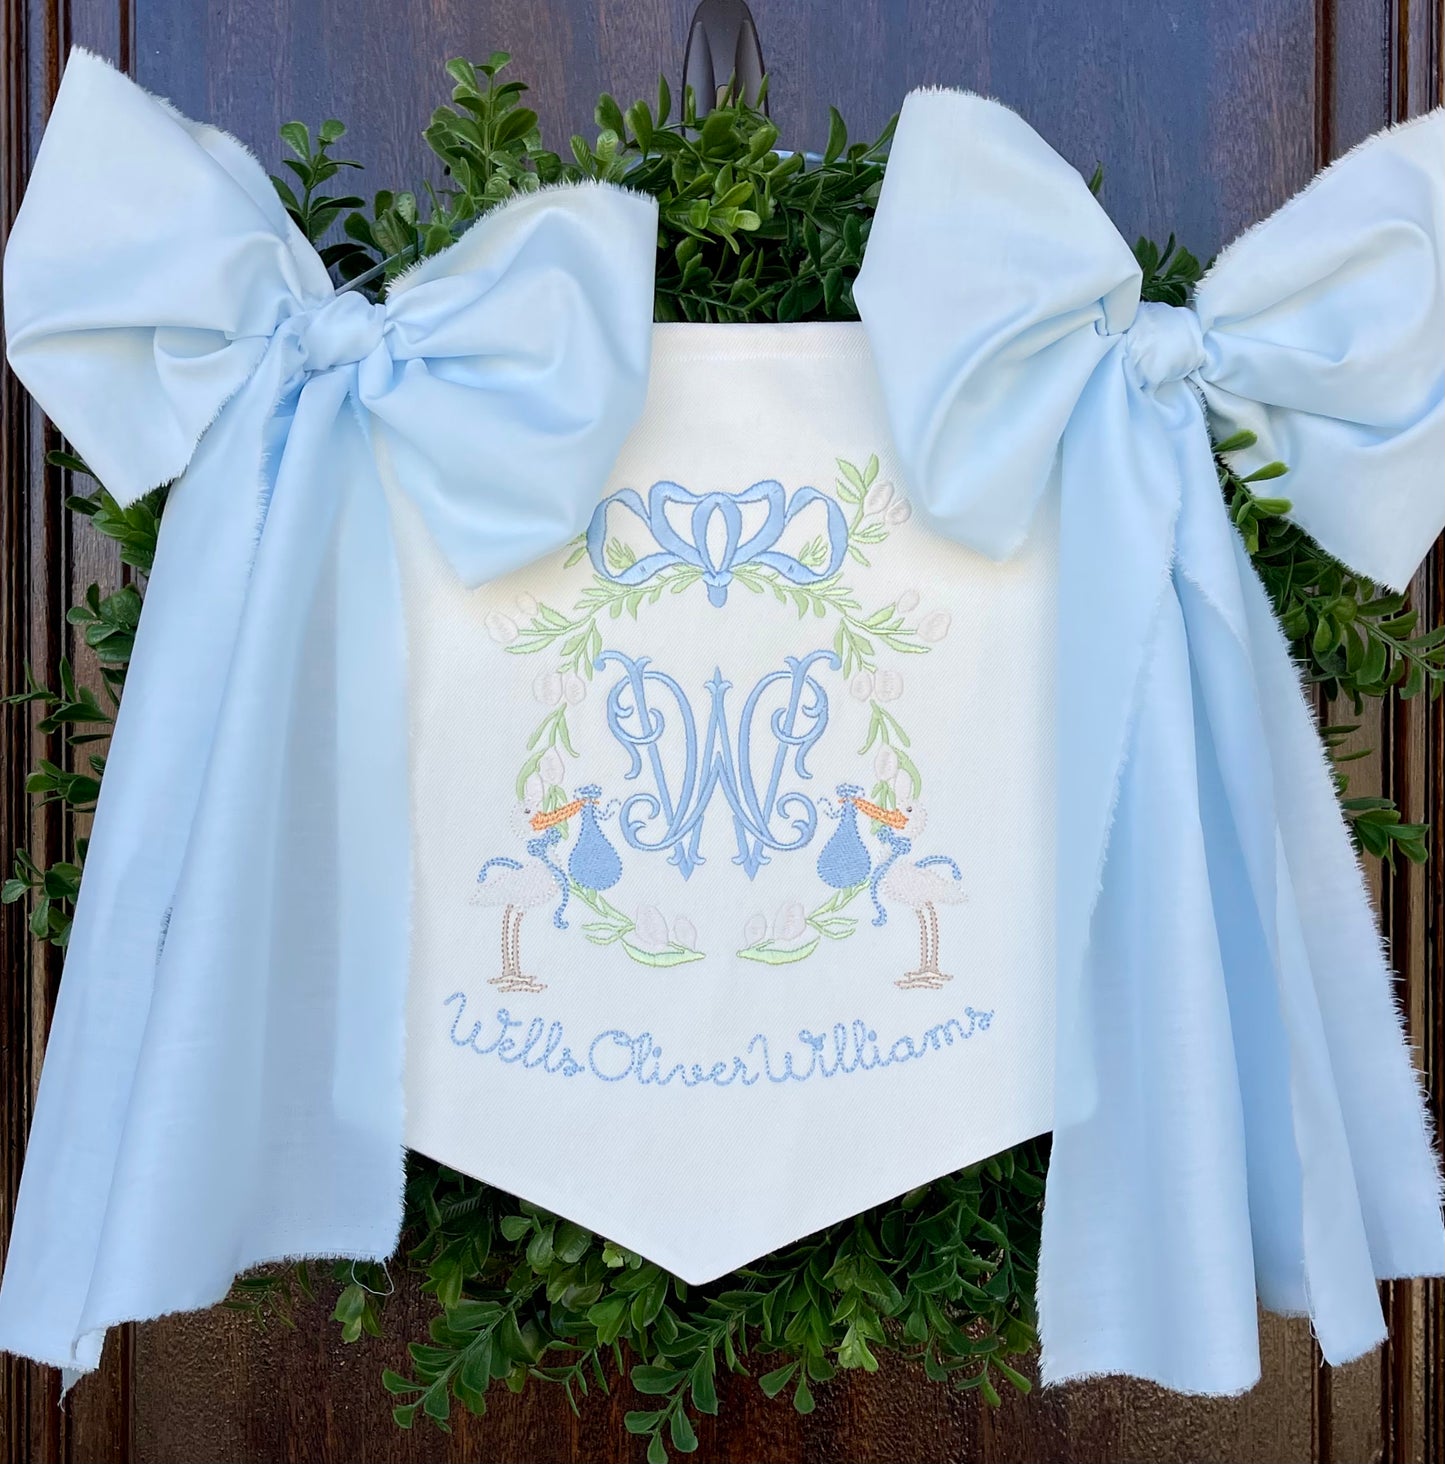 Baby Boy Banner with Stork Frame